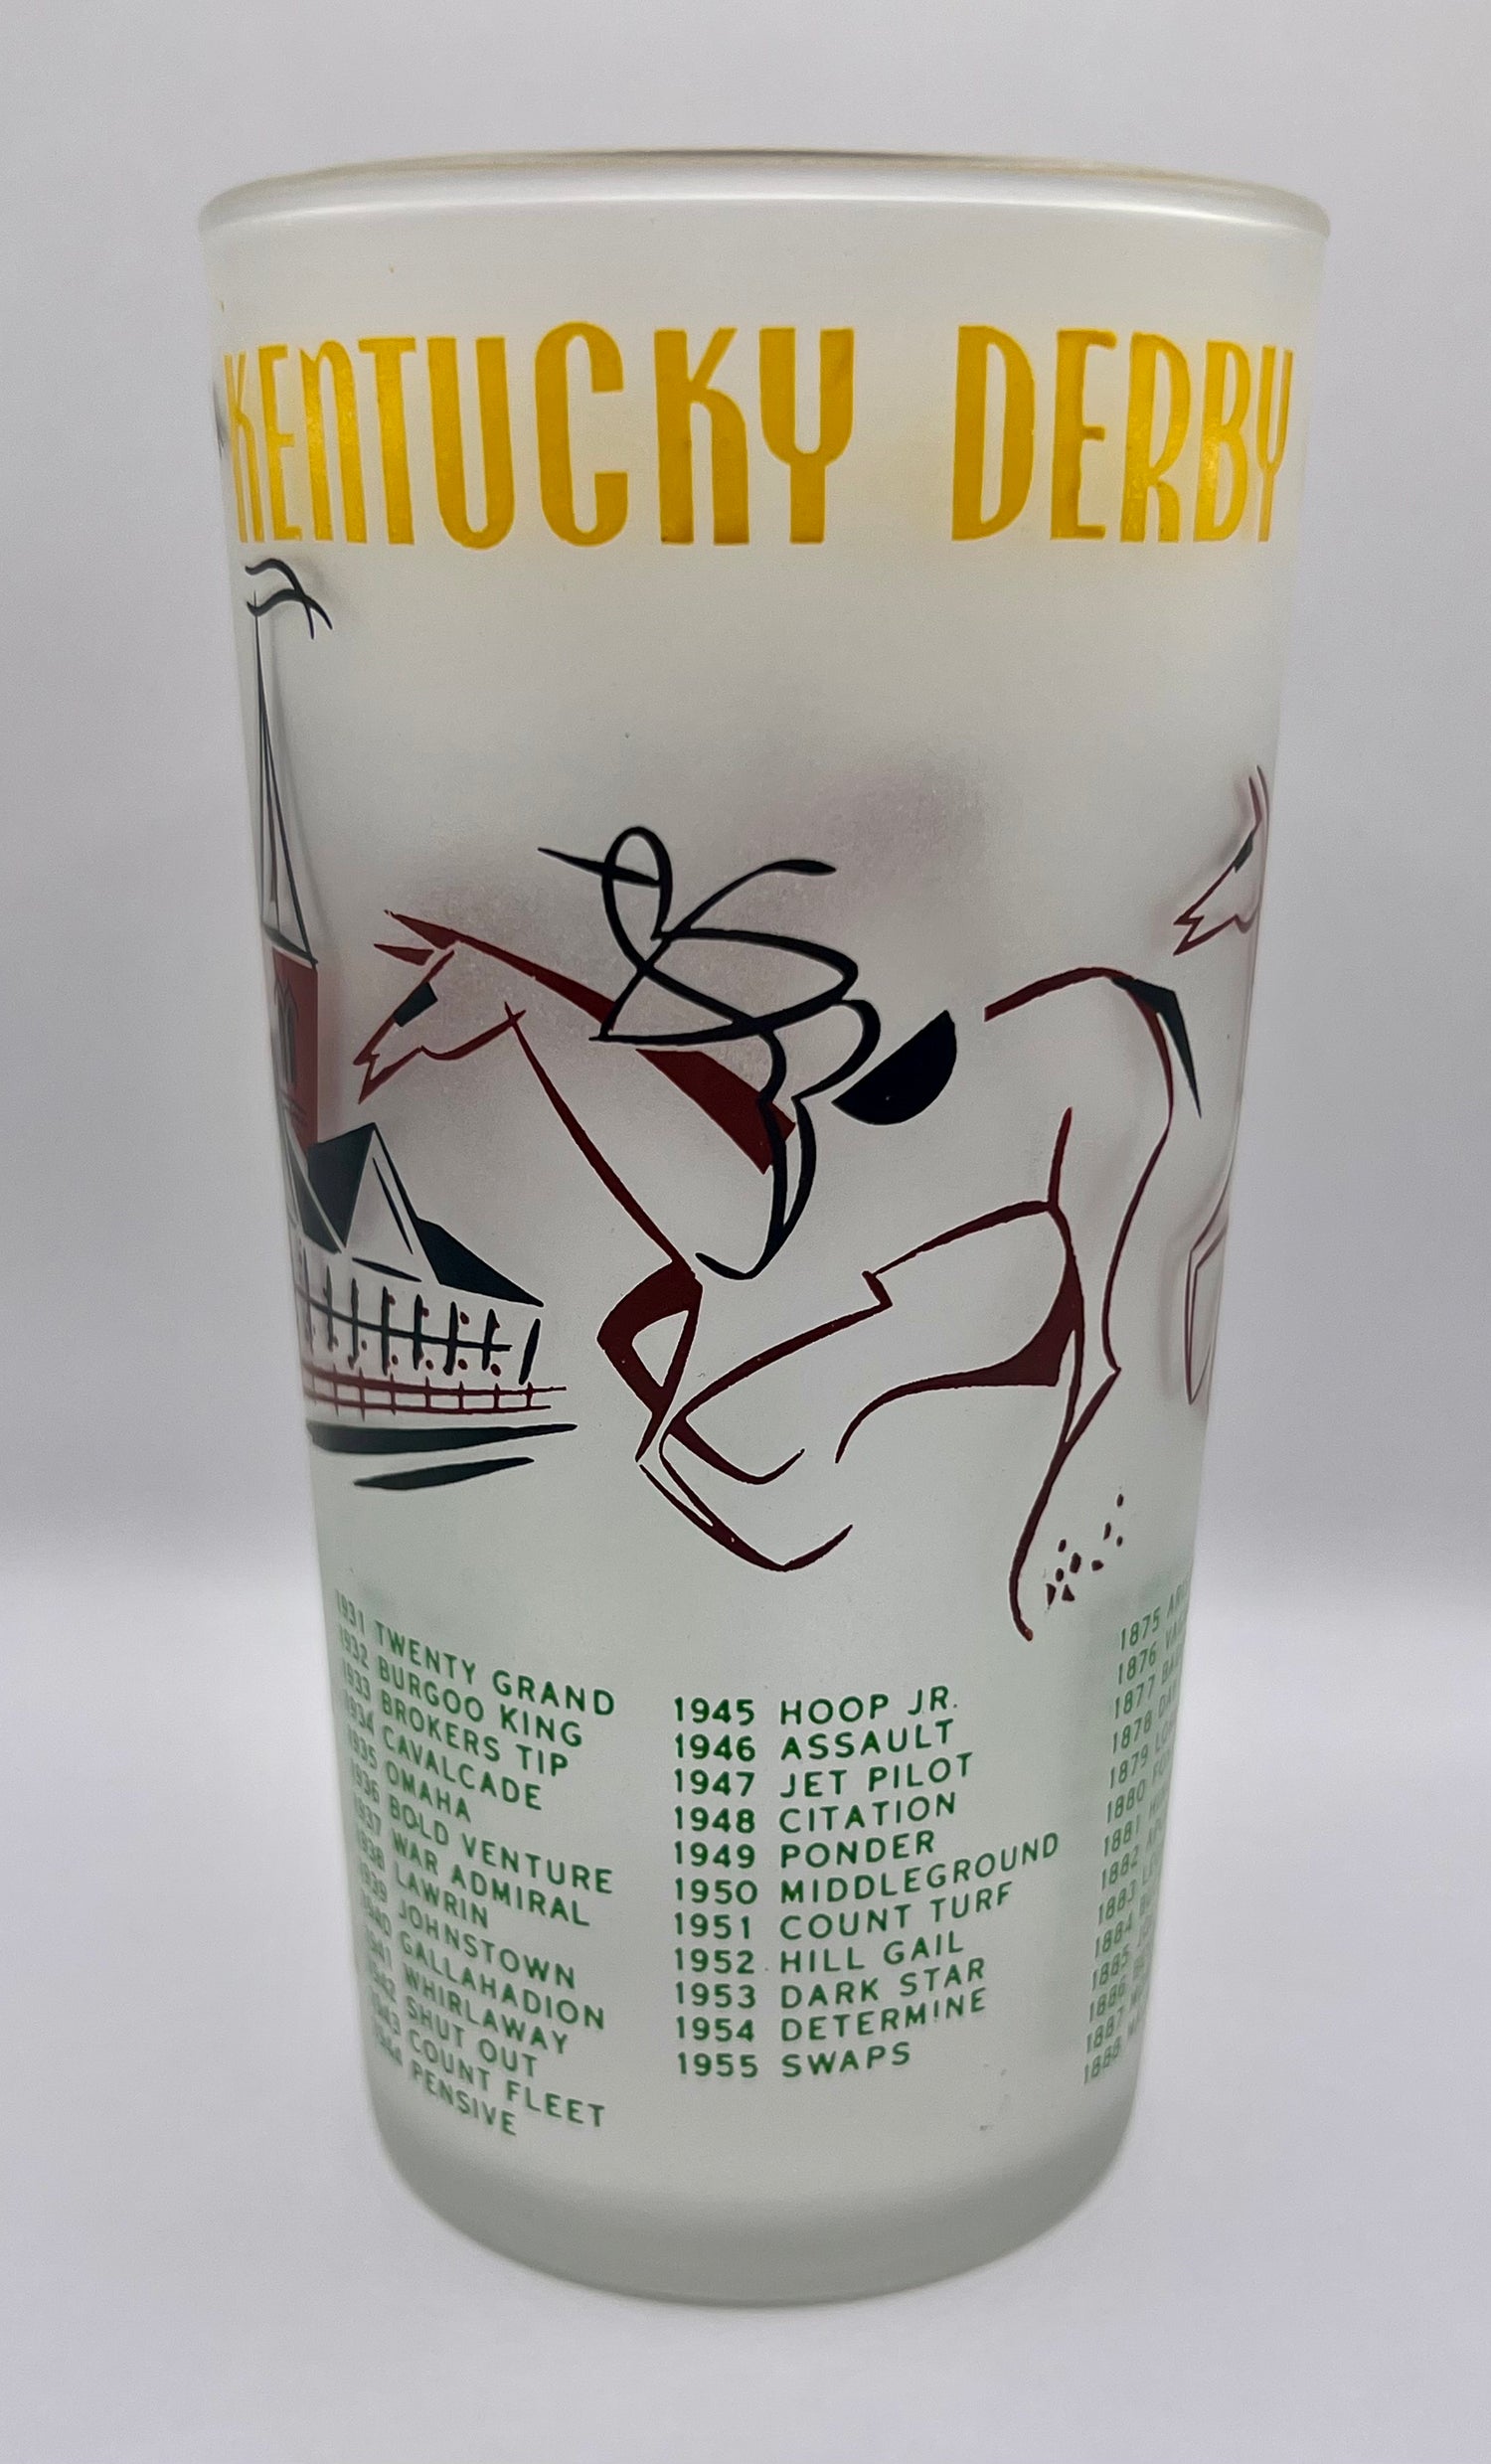 1950 to 1959 Kentucky Derby Glasses